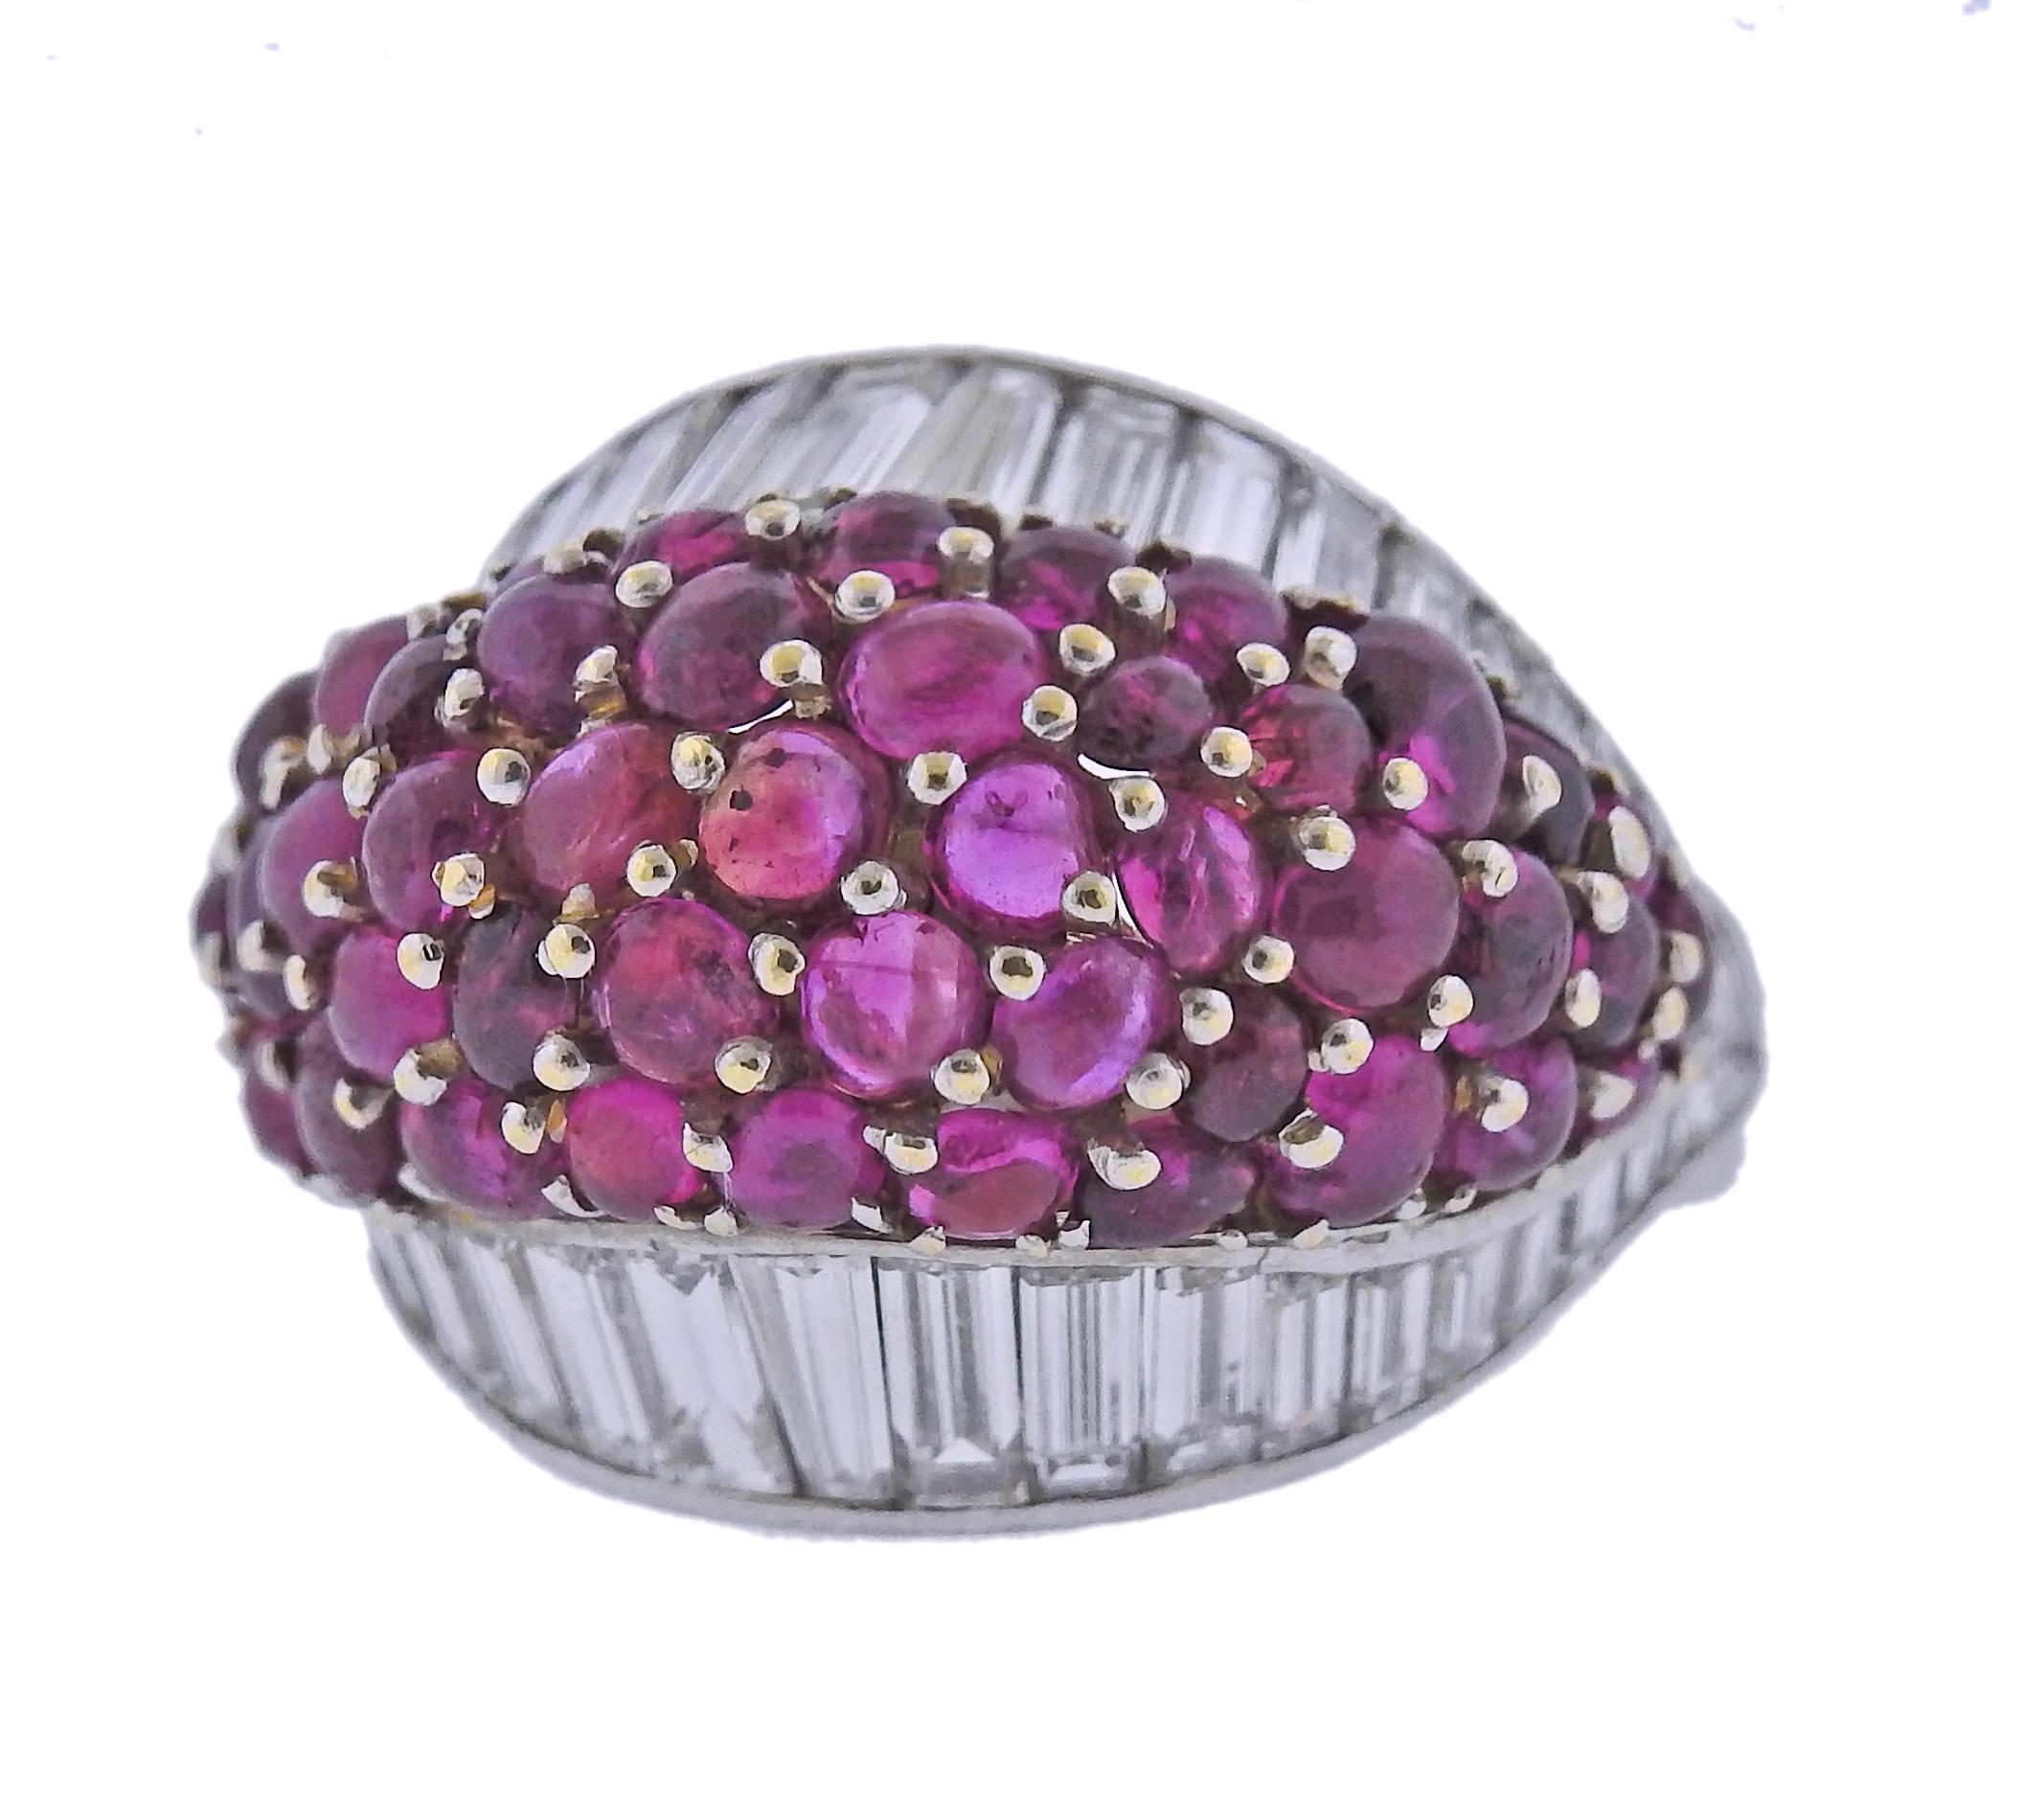 Retro platinum cocktail ring, with rubies and approx. 1.50ctw in VS-Si/H baguette diamonds.  Ring size 6.5, Top is 19mm wide. Tested plat/18k. Weight - 13.4 grams.